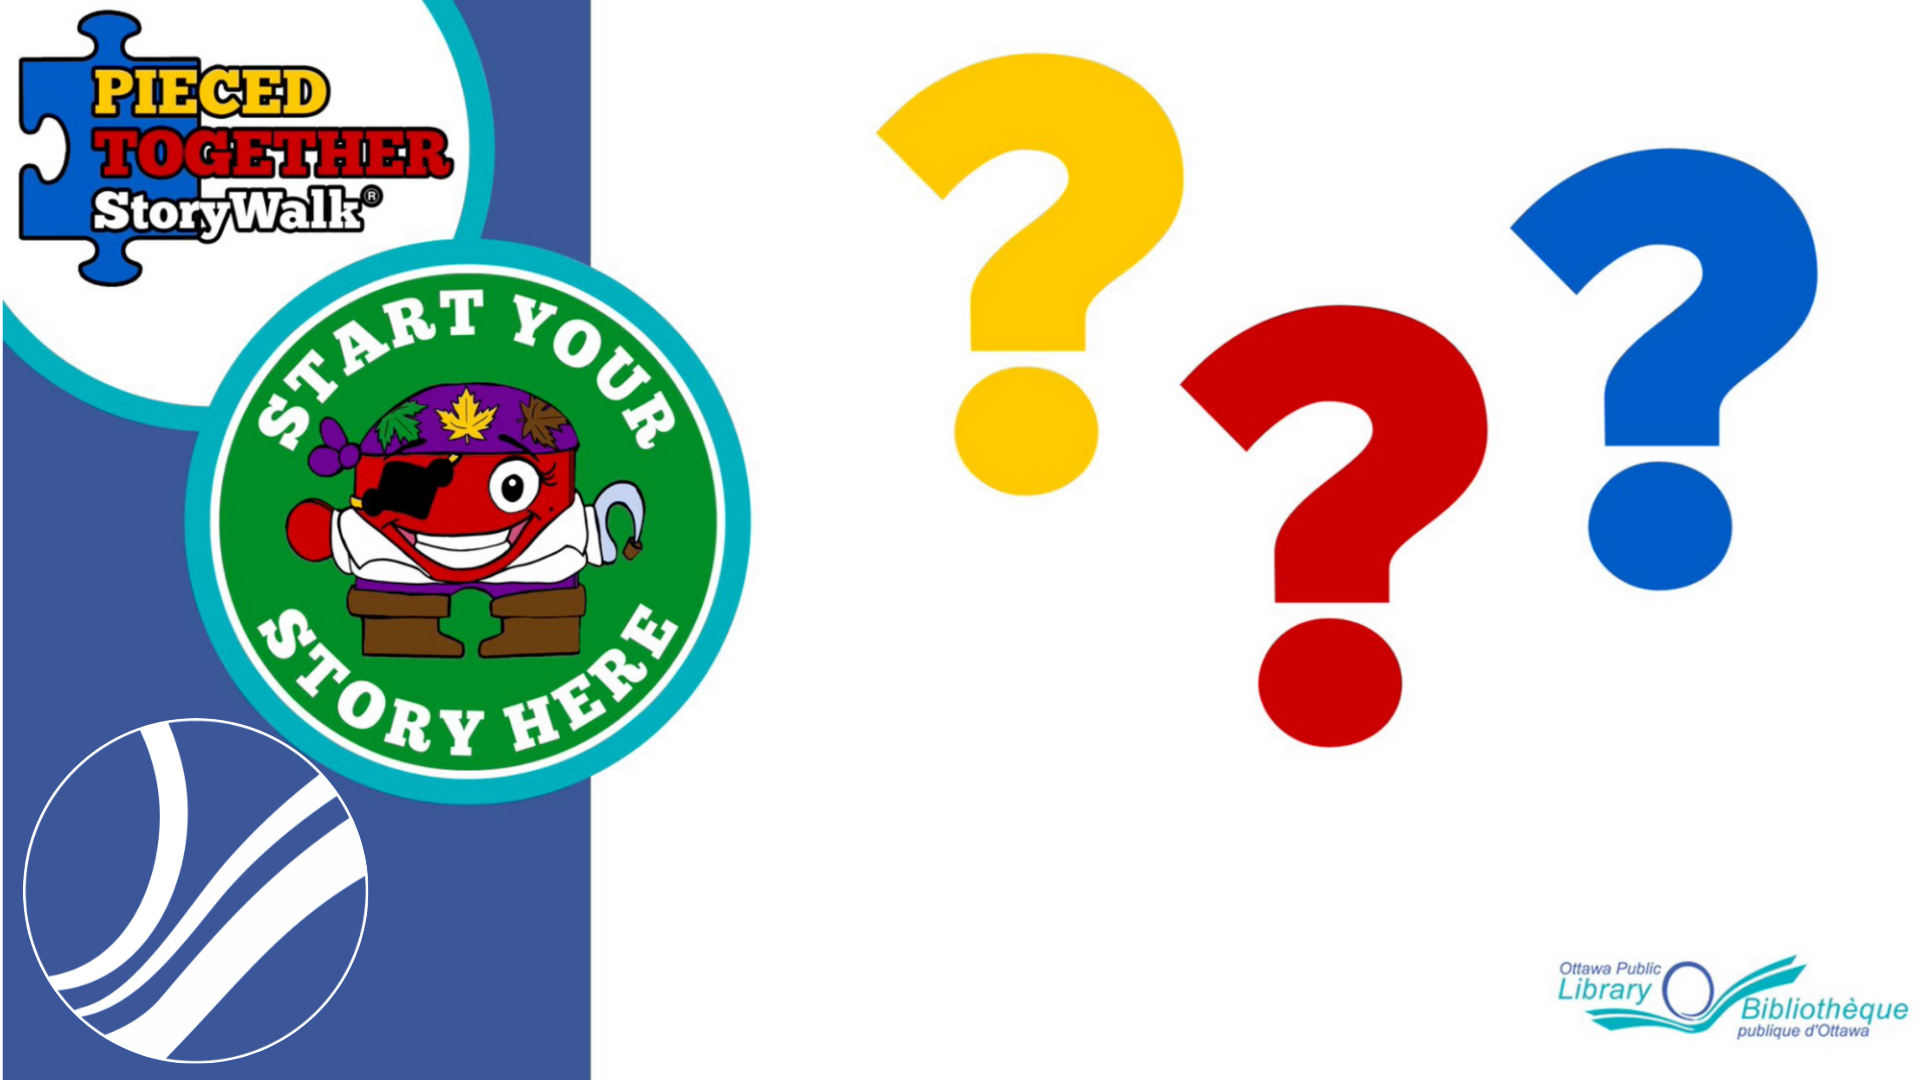 Start your story here. Red animated pirate beside large question marks in yellow, red, and blue.